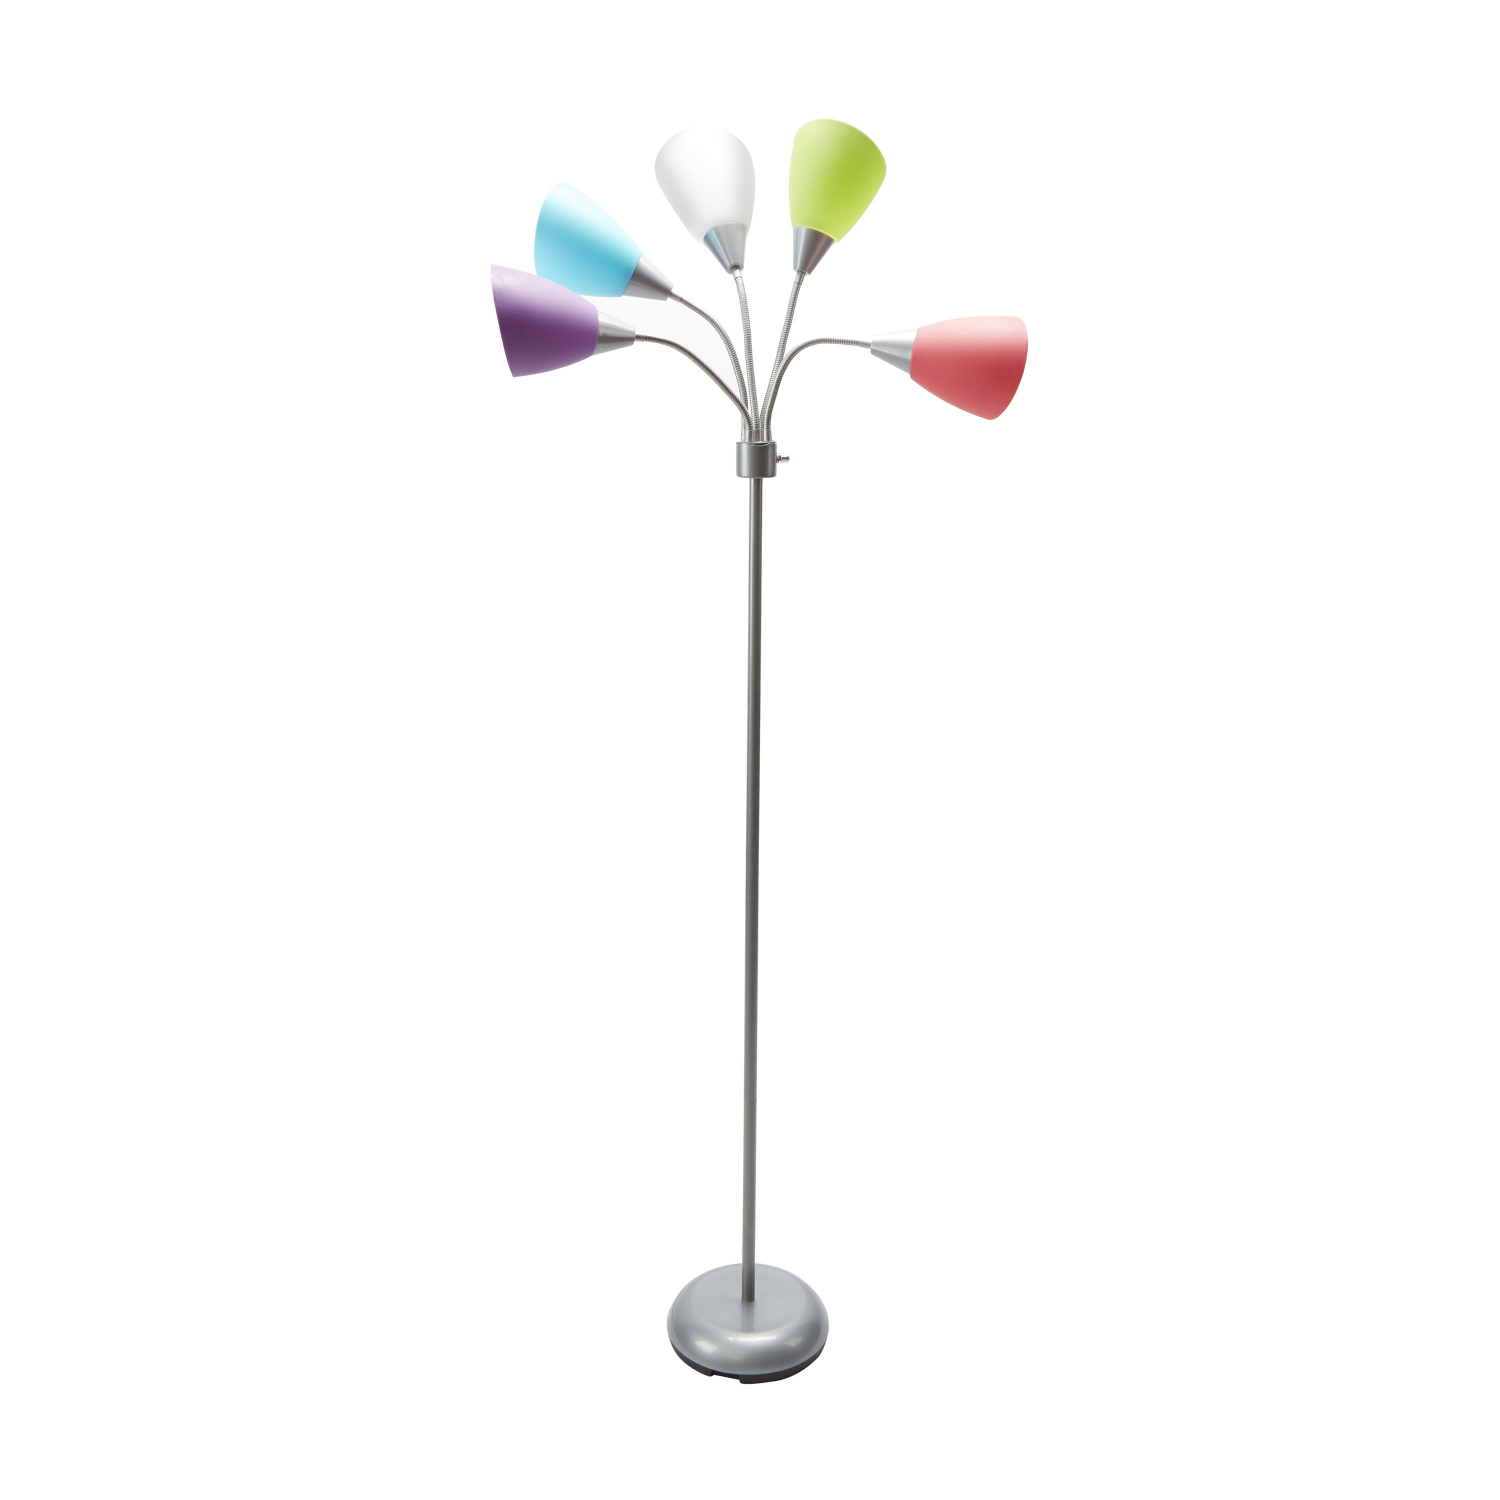 Details About Floor Lamp Stand W 5 Multi Color Light Shade Adjustable Arm Room Lighting Dorm intended for size 1500 X 1500